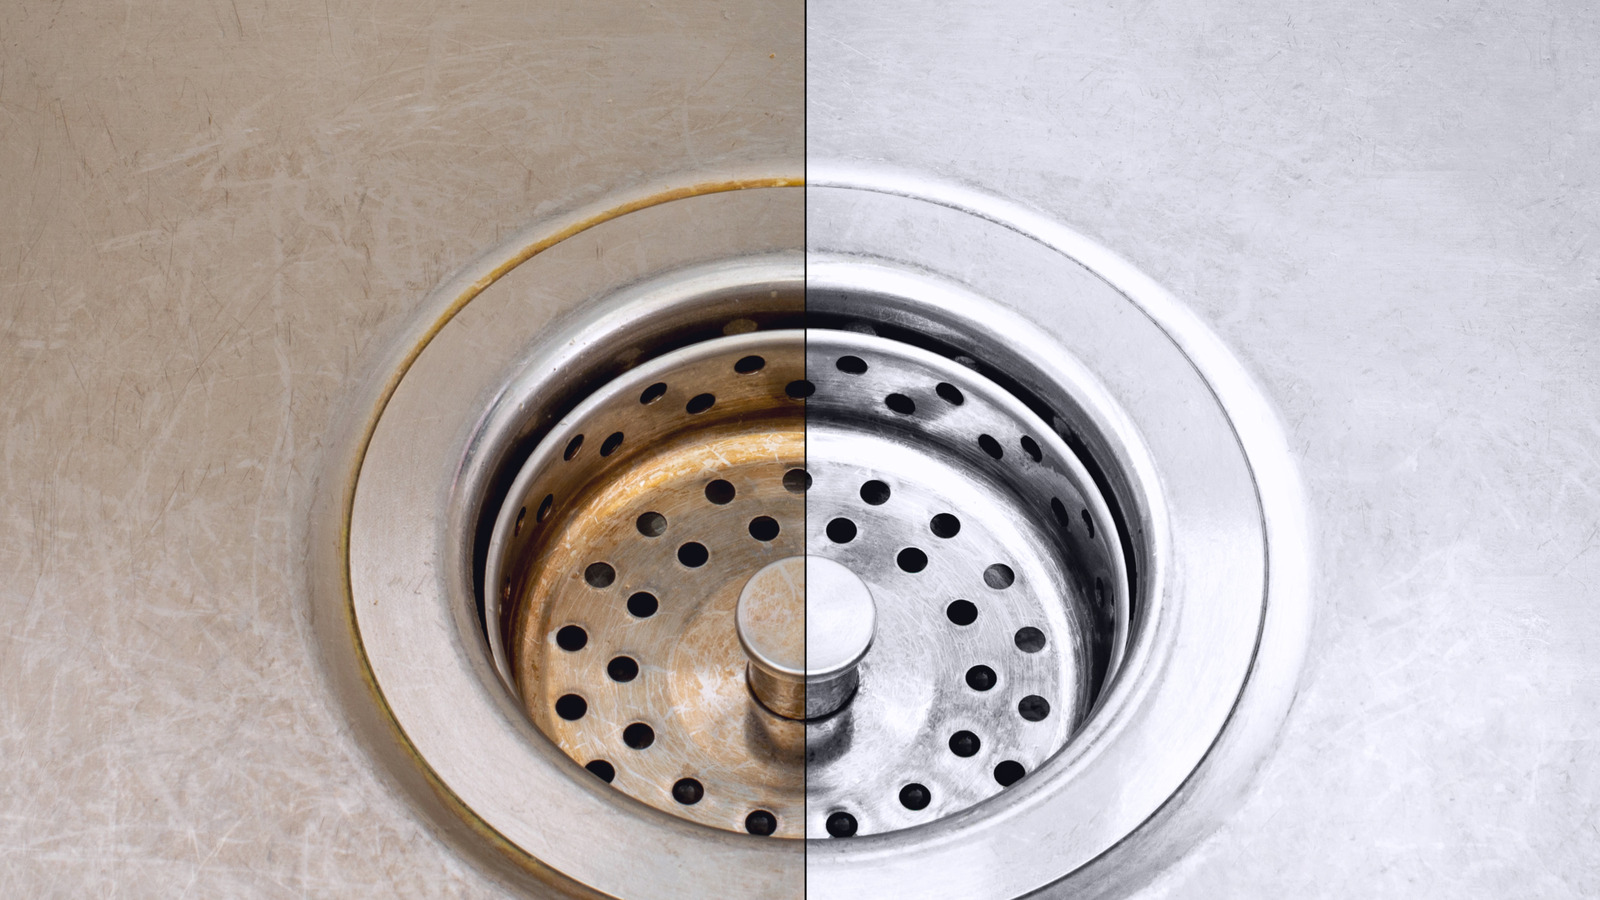 A Housekeeper Advises Using This to Clean Your Stainless-Steel